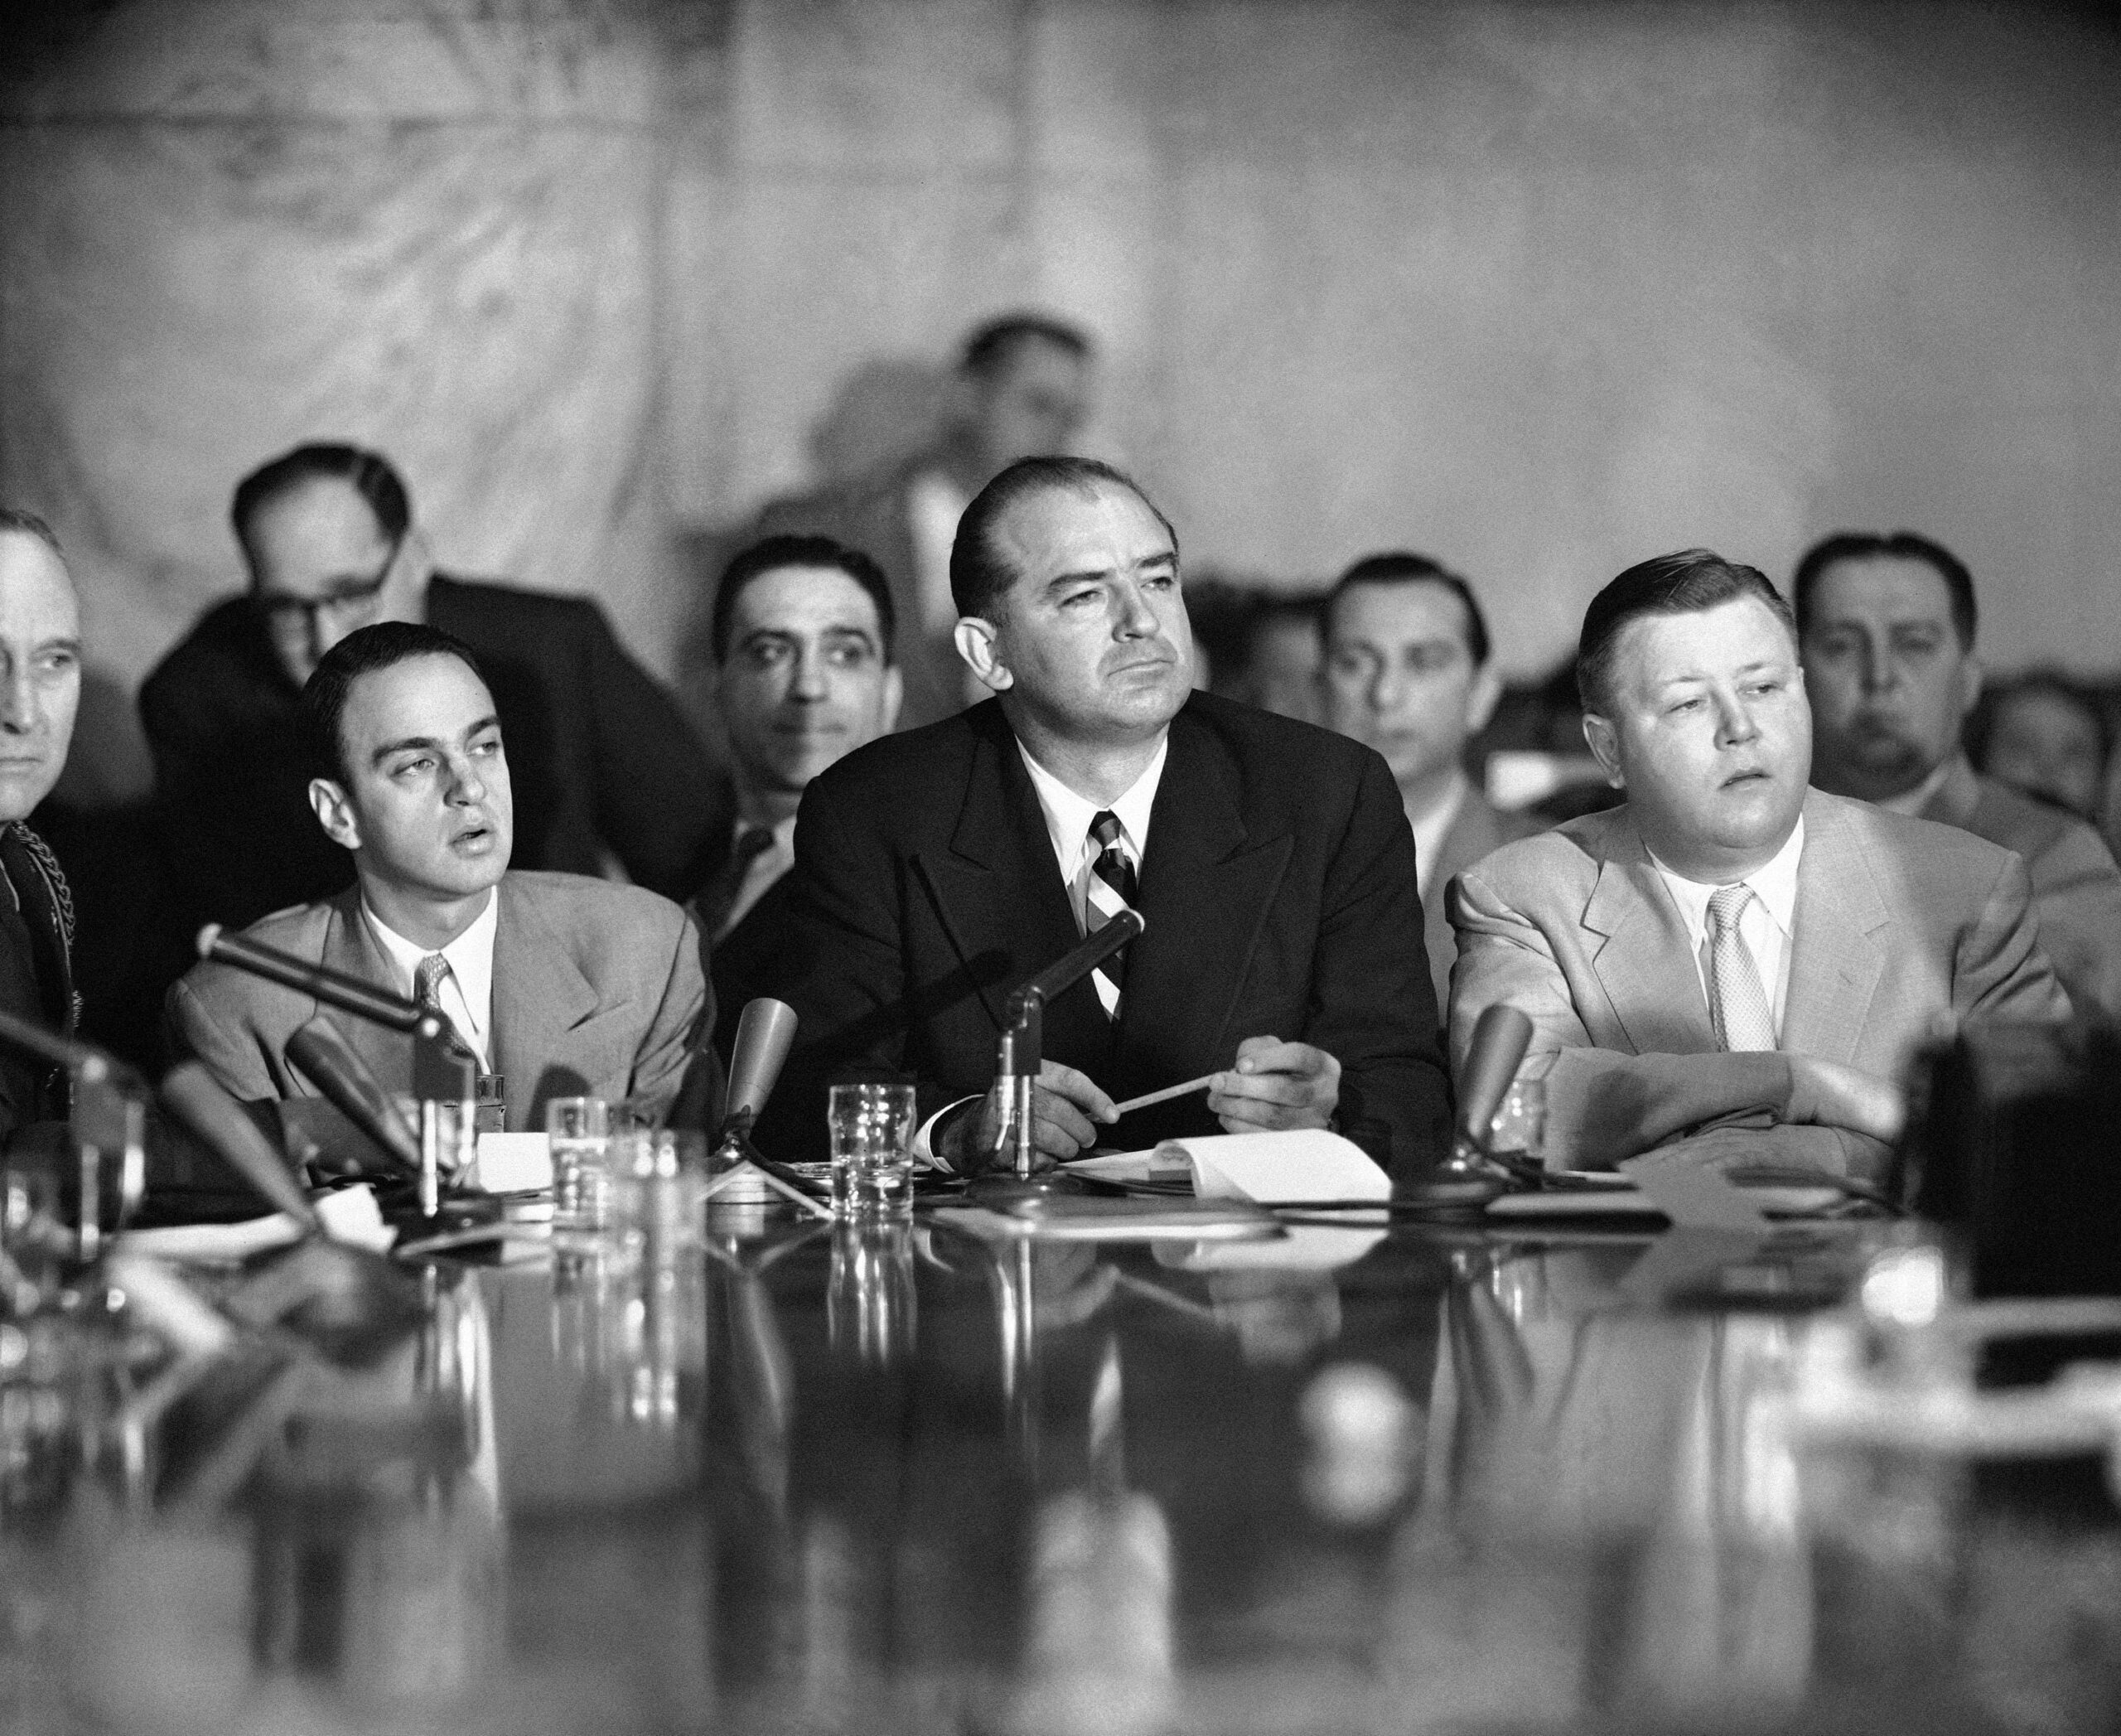 how many communists did senator joseph mccarthy say he found in the state department